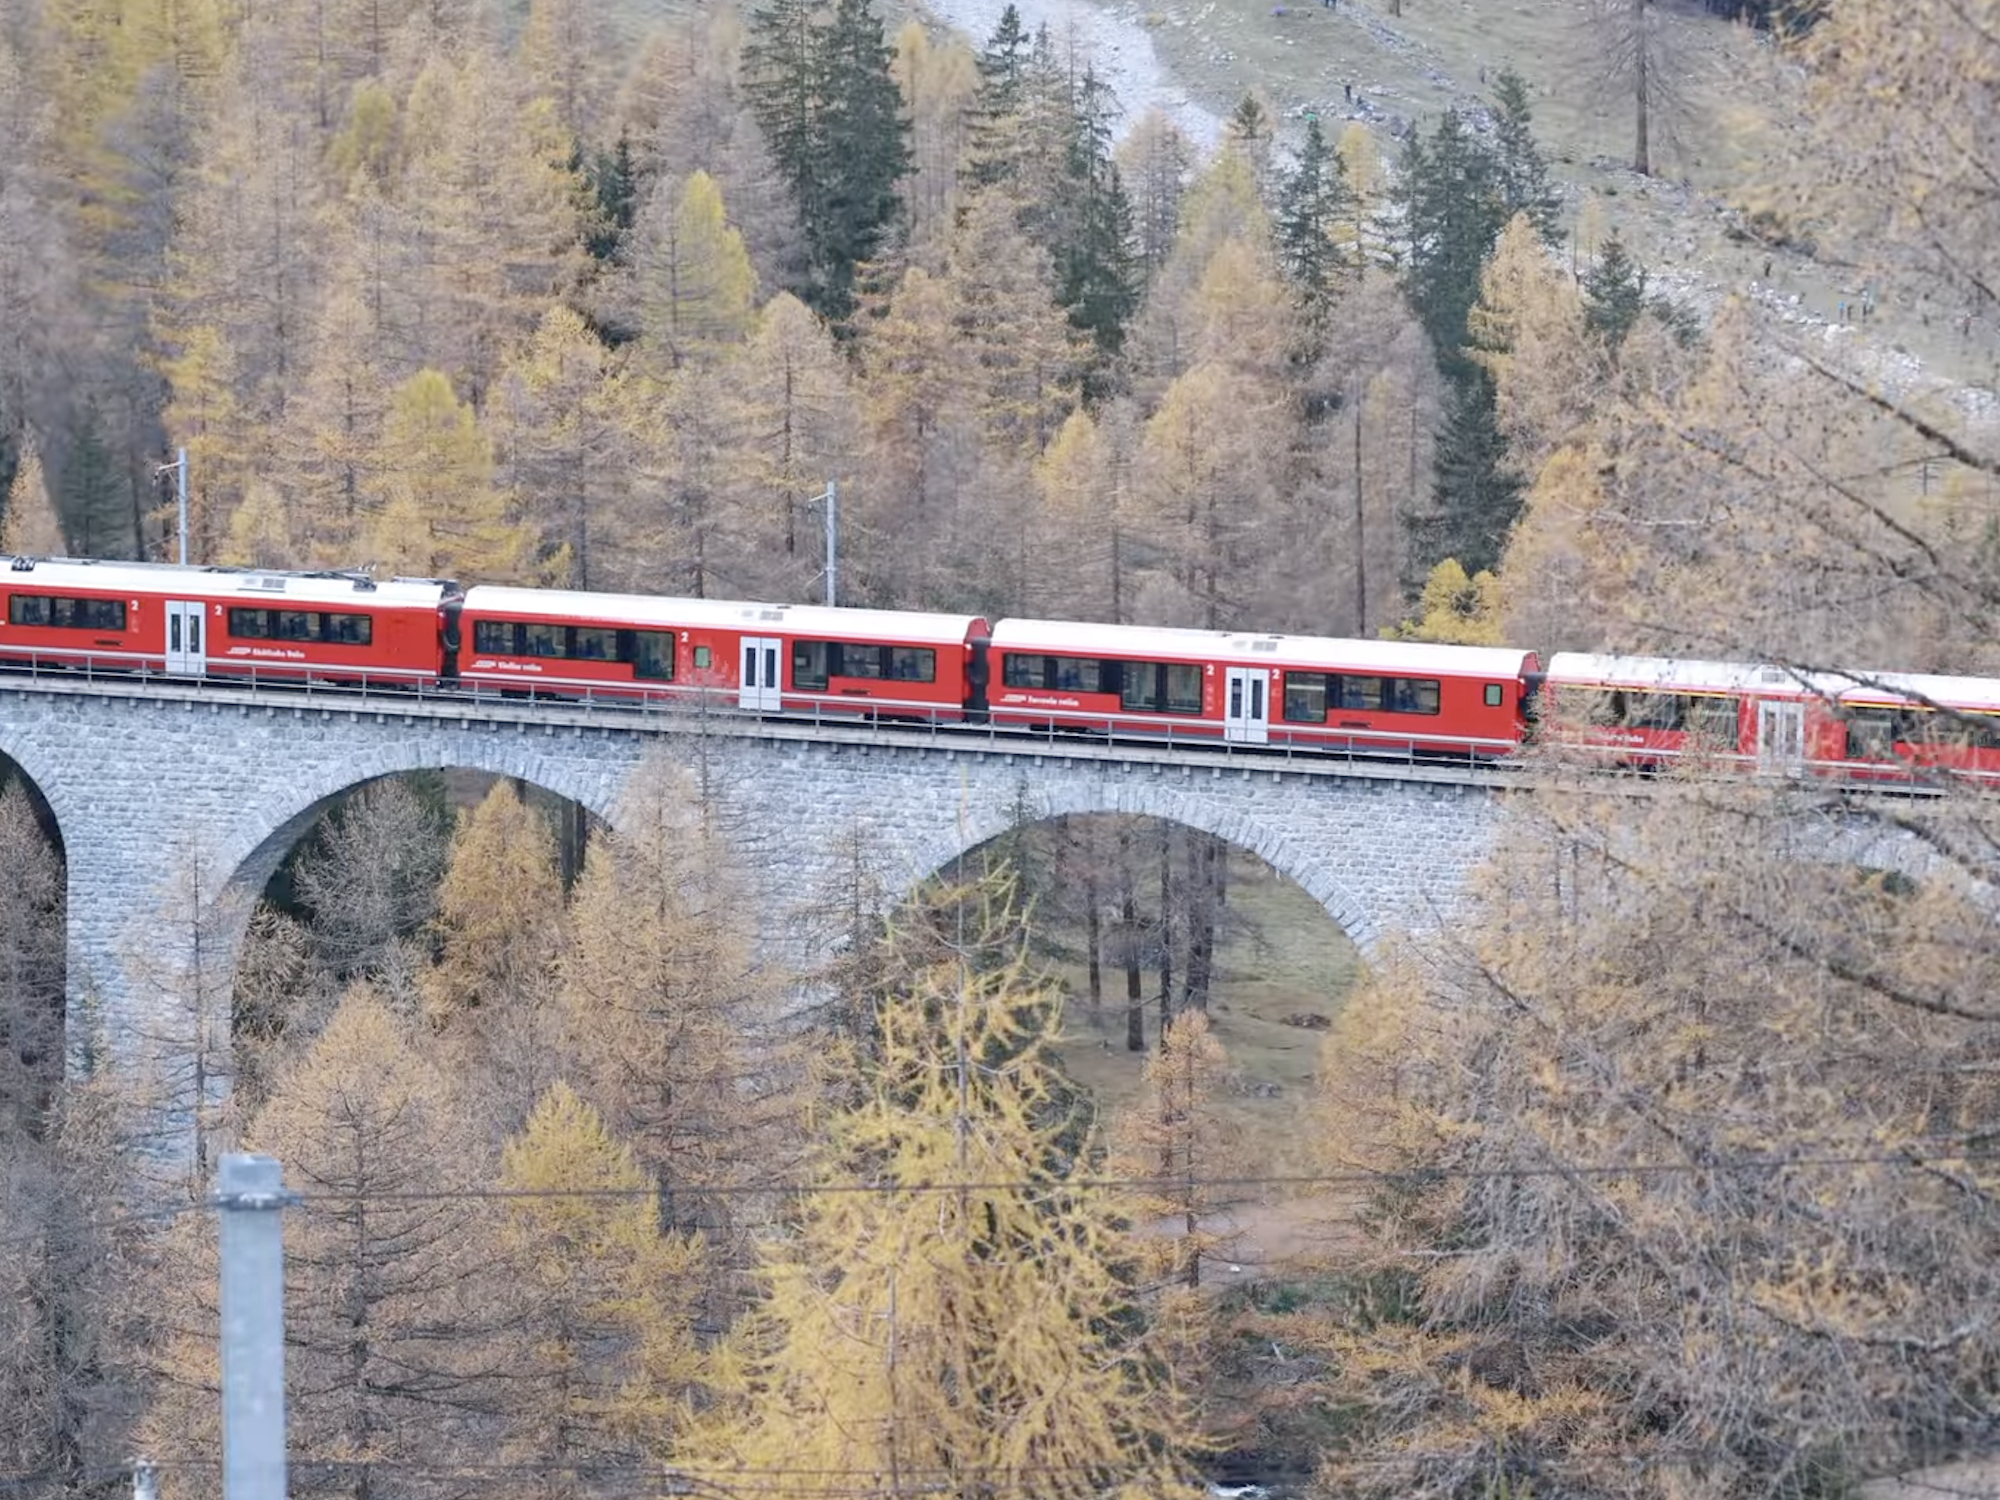 Switzerland sets world record for longest passenger train—and it’s electric